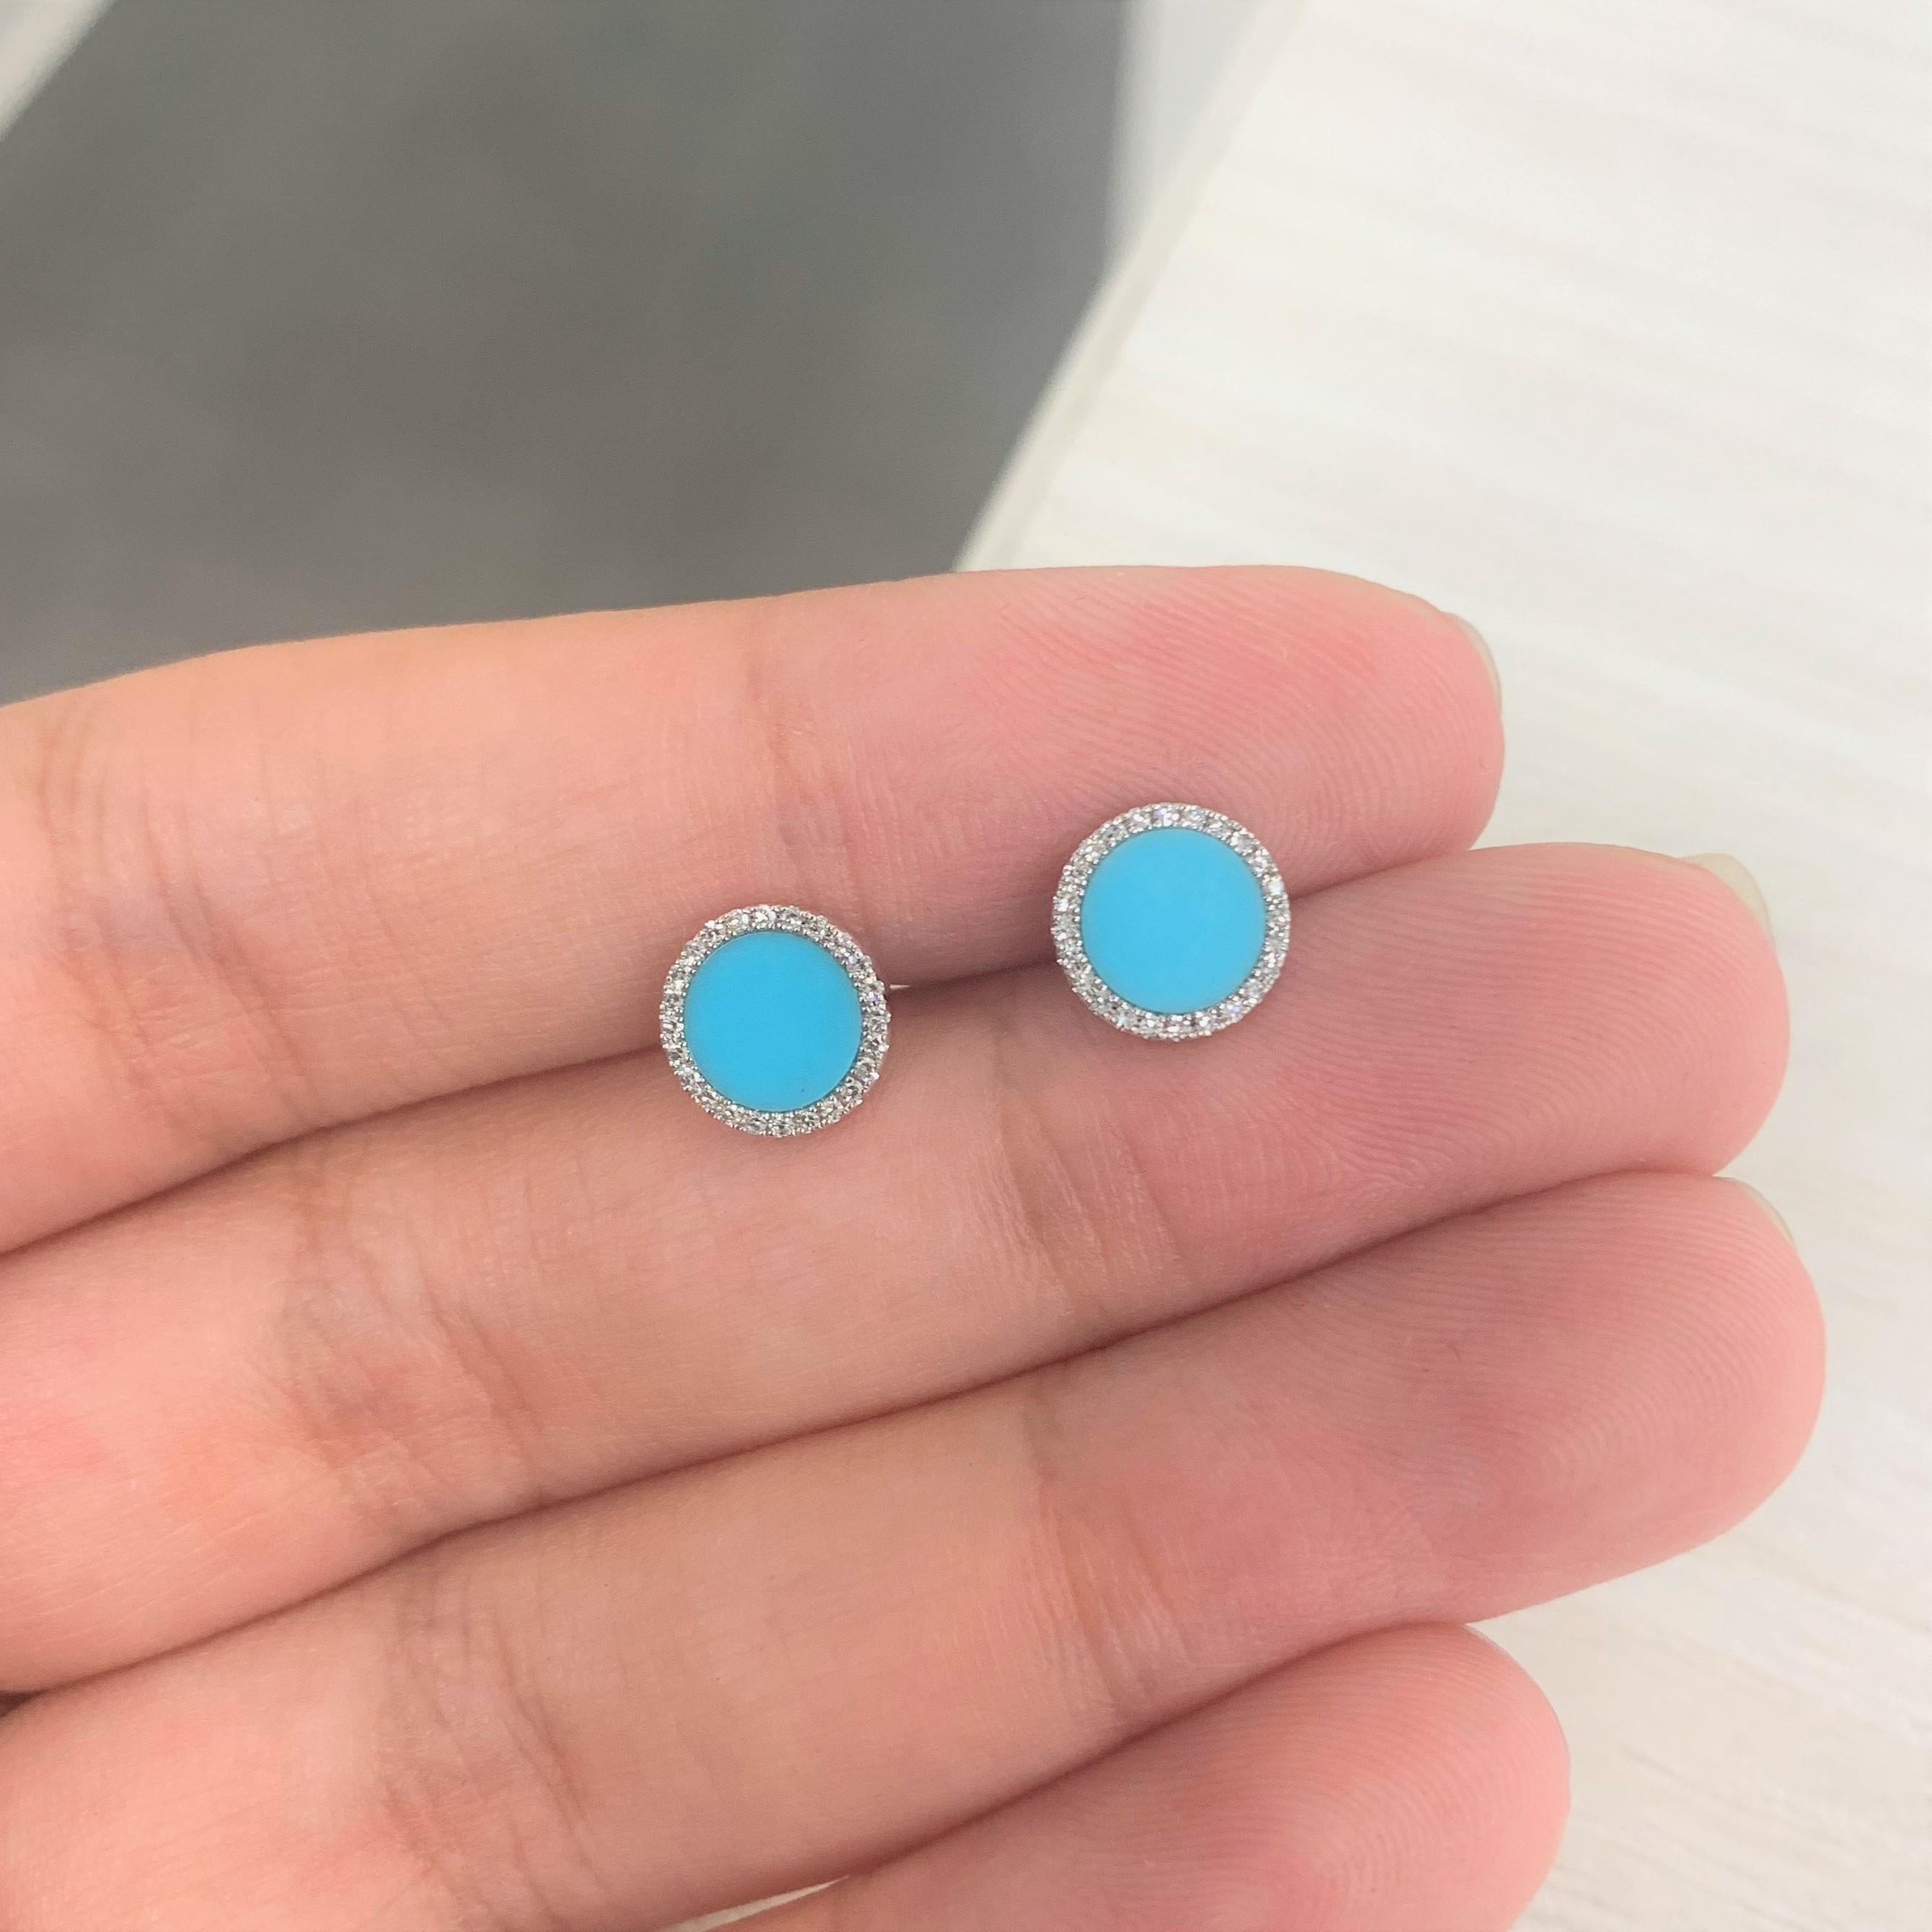 Show off your unique style with these striking diamond and turquoise disc Studs earrings. The earrings are crafted in 14k gold and feature approximately 0.10 ct. of genuine white diamonds. The earrings are secured with butterfly backs.  Diamond